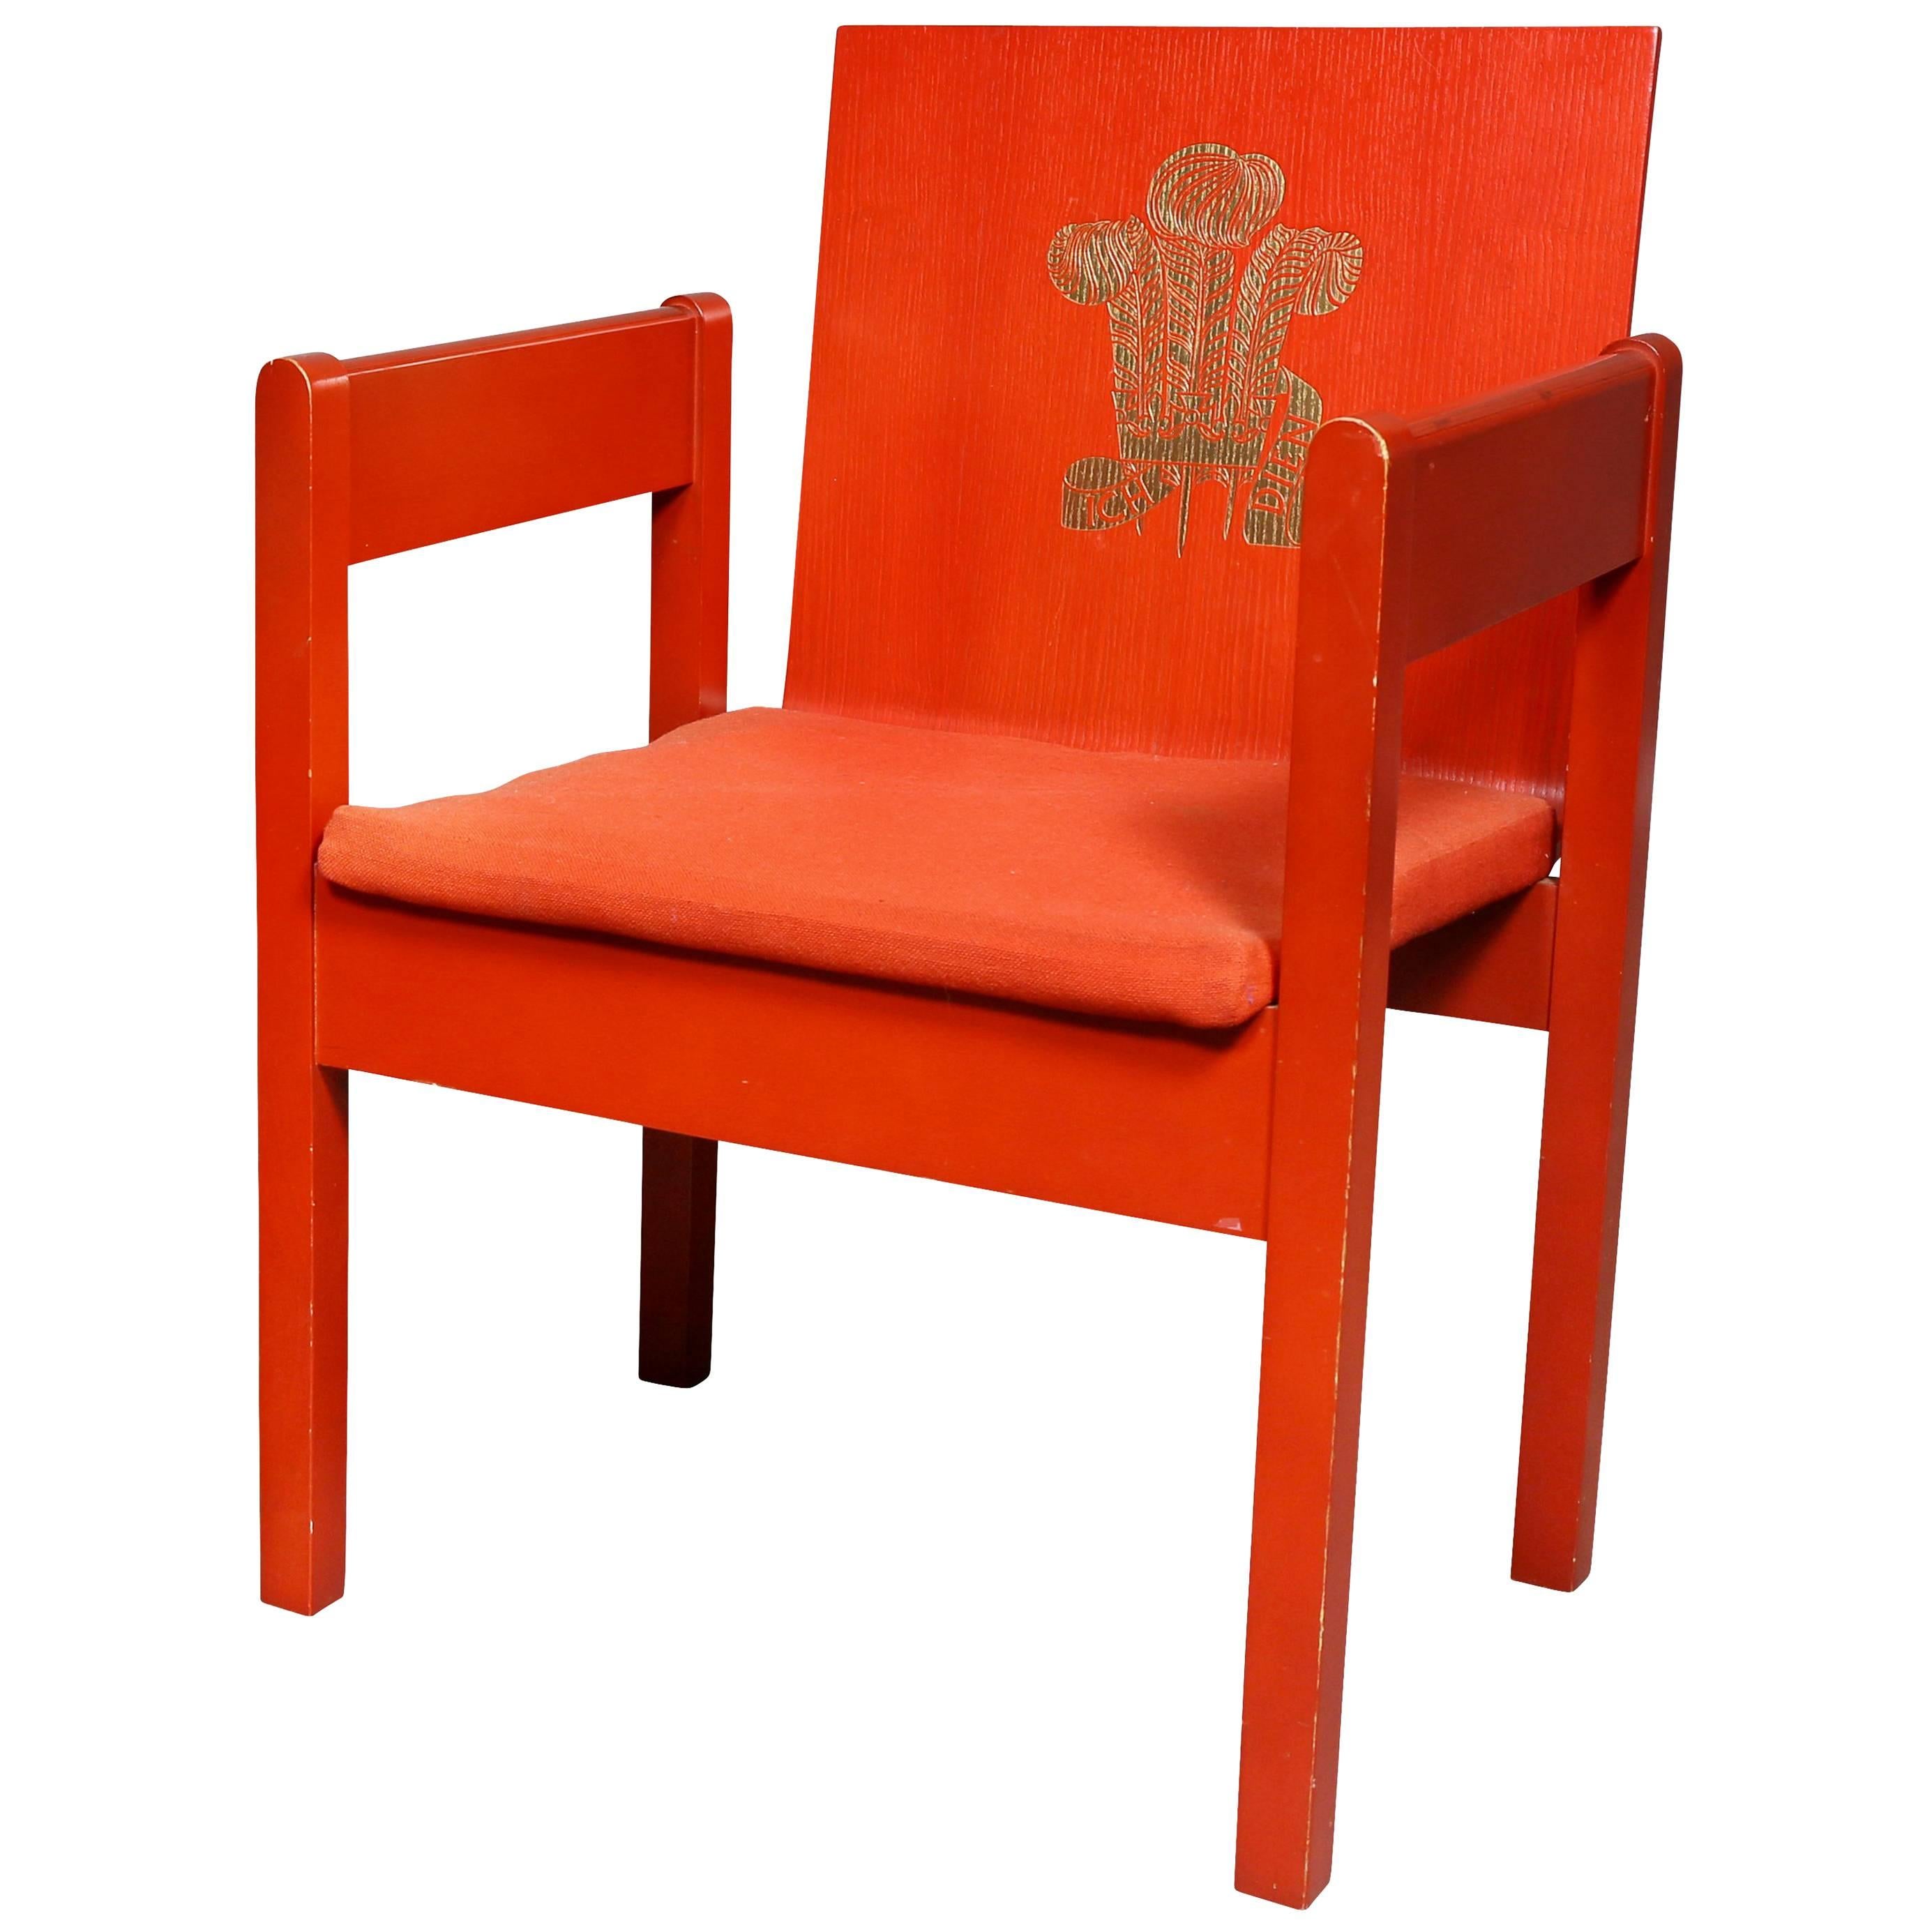 Prince of Wales Red Painted Investiture Chair